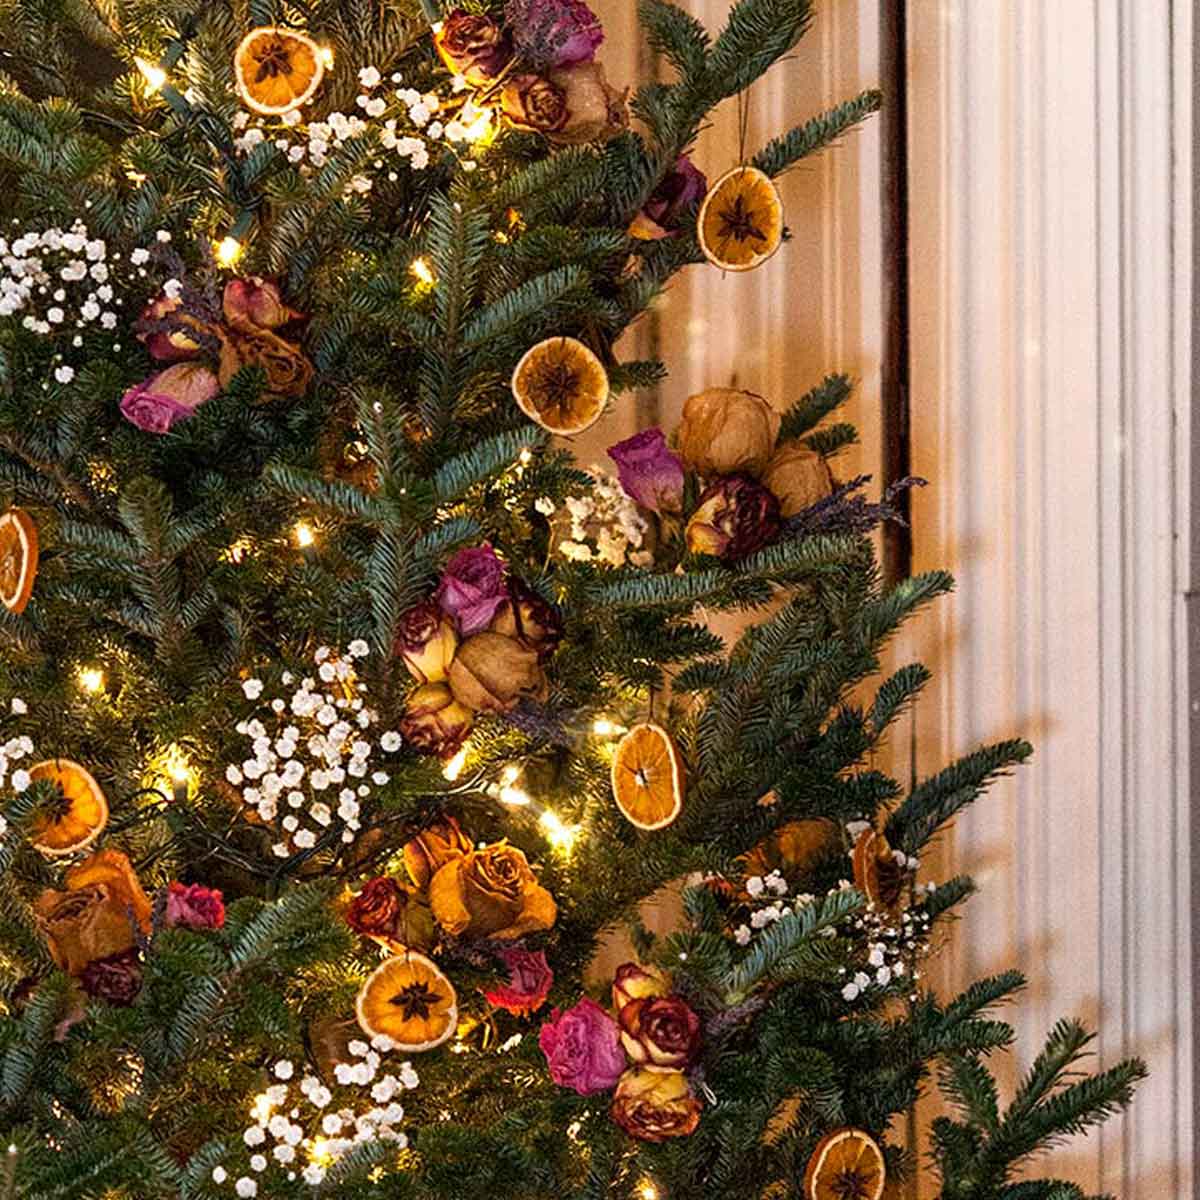 A colorful Christmas tree decorated with flowers and dry orange ornaments.